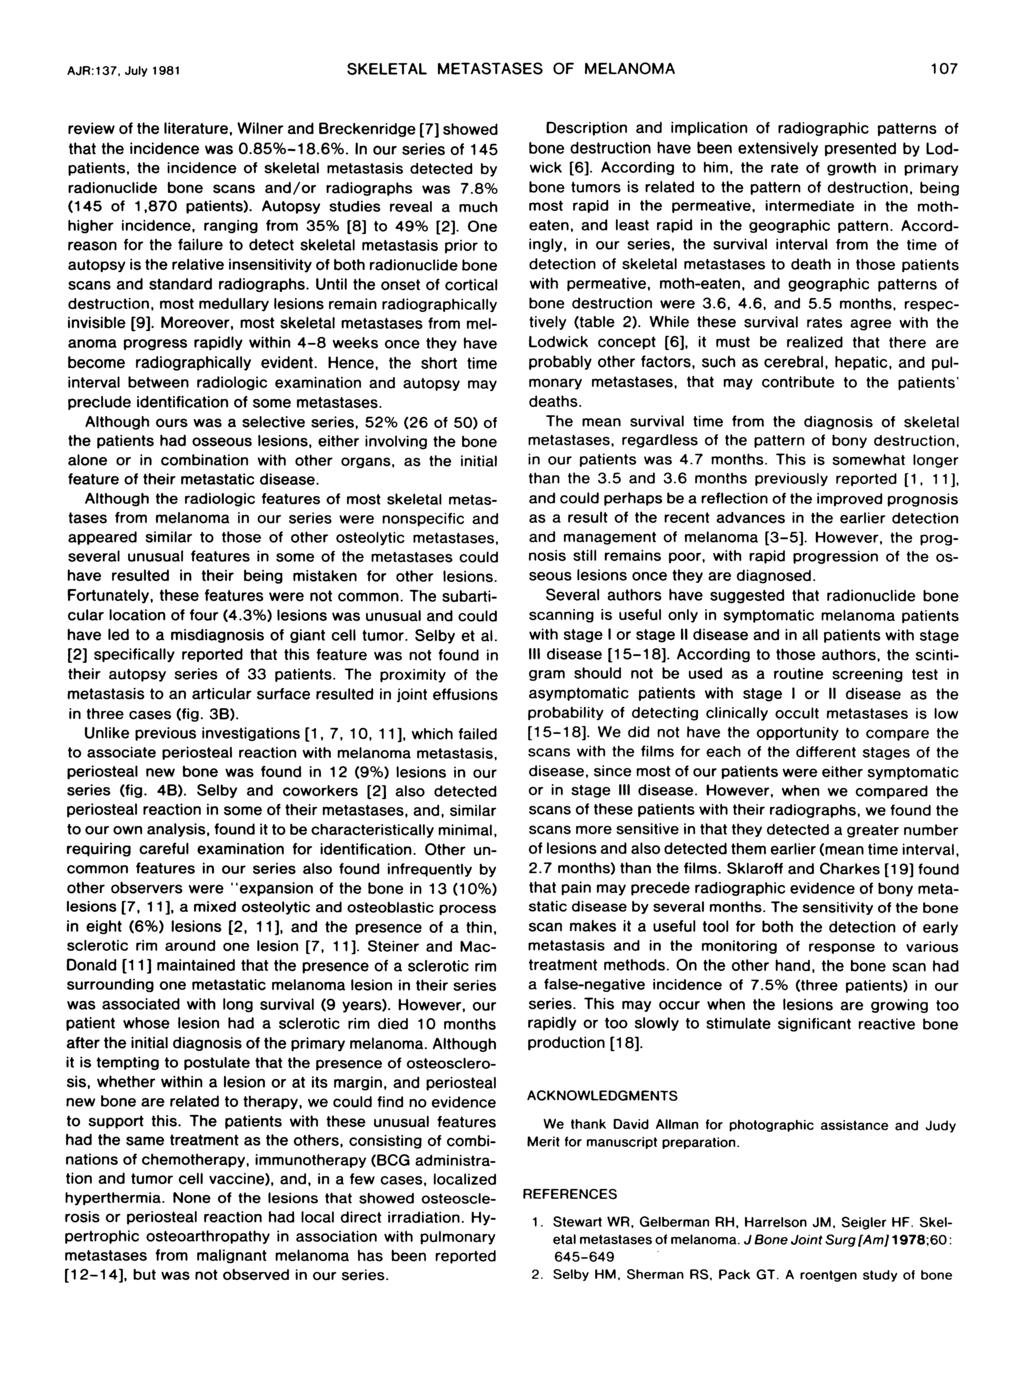 AJR:137, July 1981 SKELETAL METASTASES OF MELANOMA 107 review of the literature, Wilner and Breckenridge [7] showed that the incidence was 0.85%-18.6%.